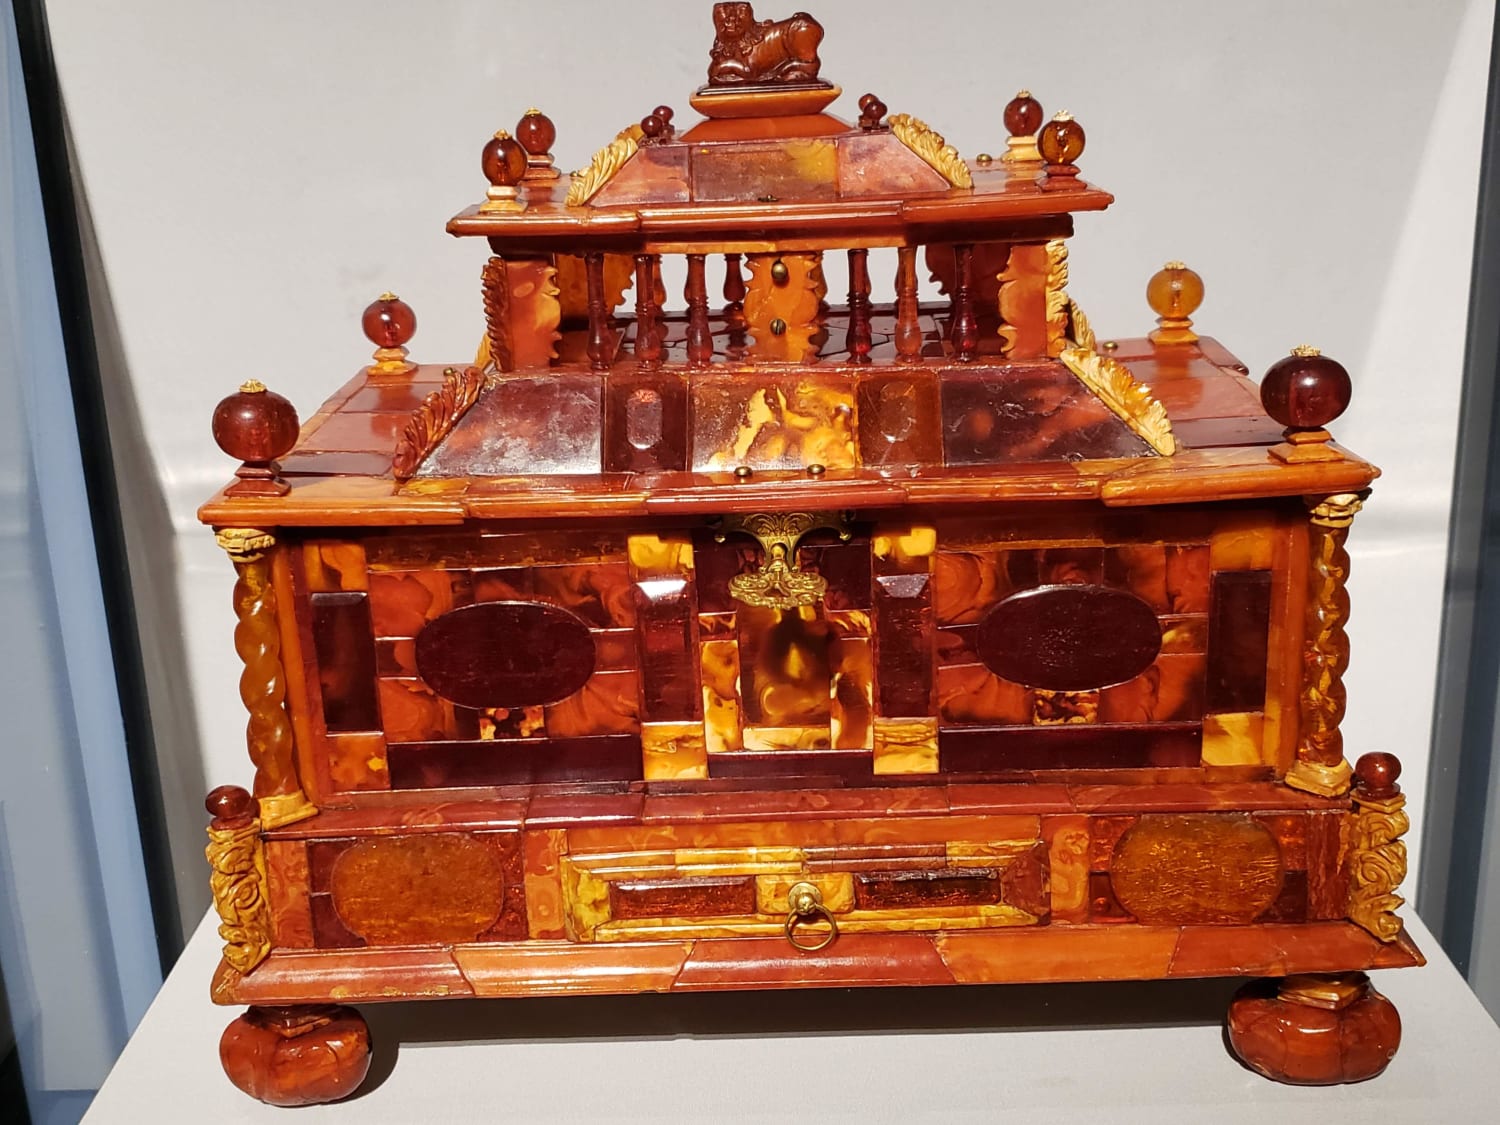 Amber casket attributed to Michel Redlin, an amber carver of Danzig (Gdansk), c 1680. Metropolitan Museum of Art collection